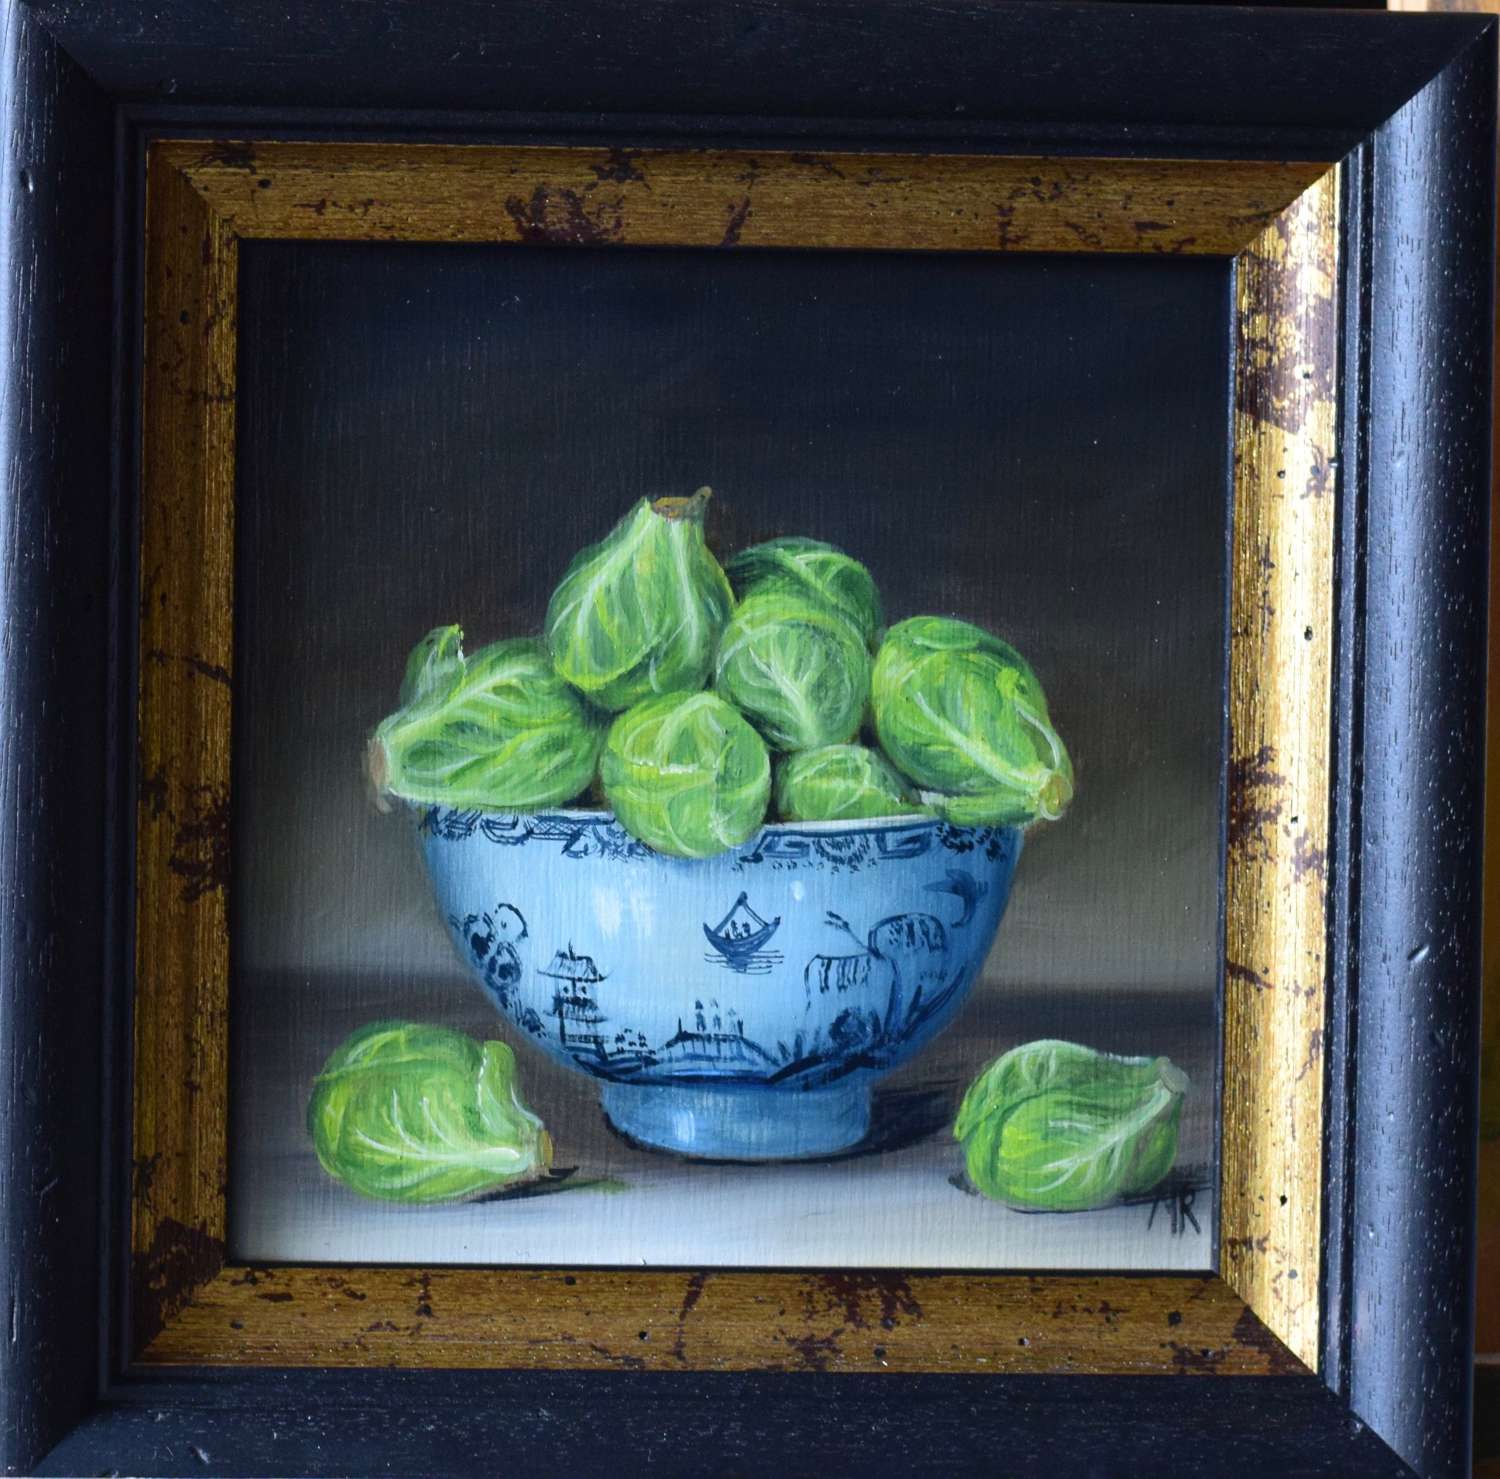 Bowl of Brussel Sprouts